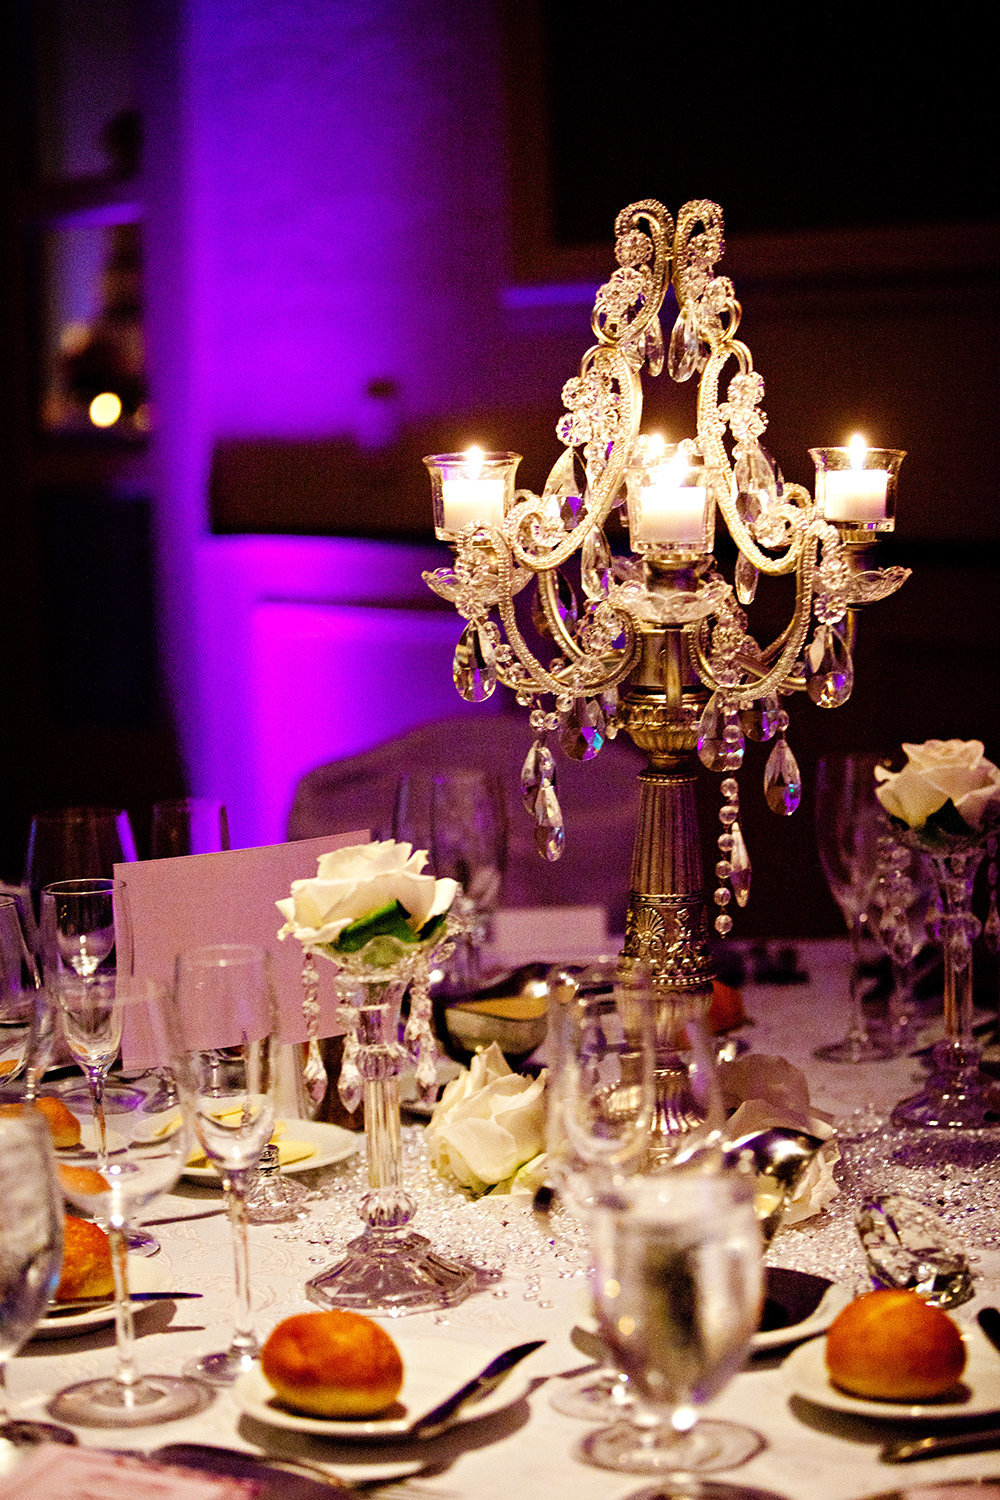 Beautiful chandelier table centerpieces with candles